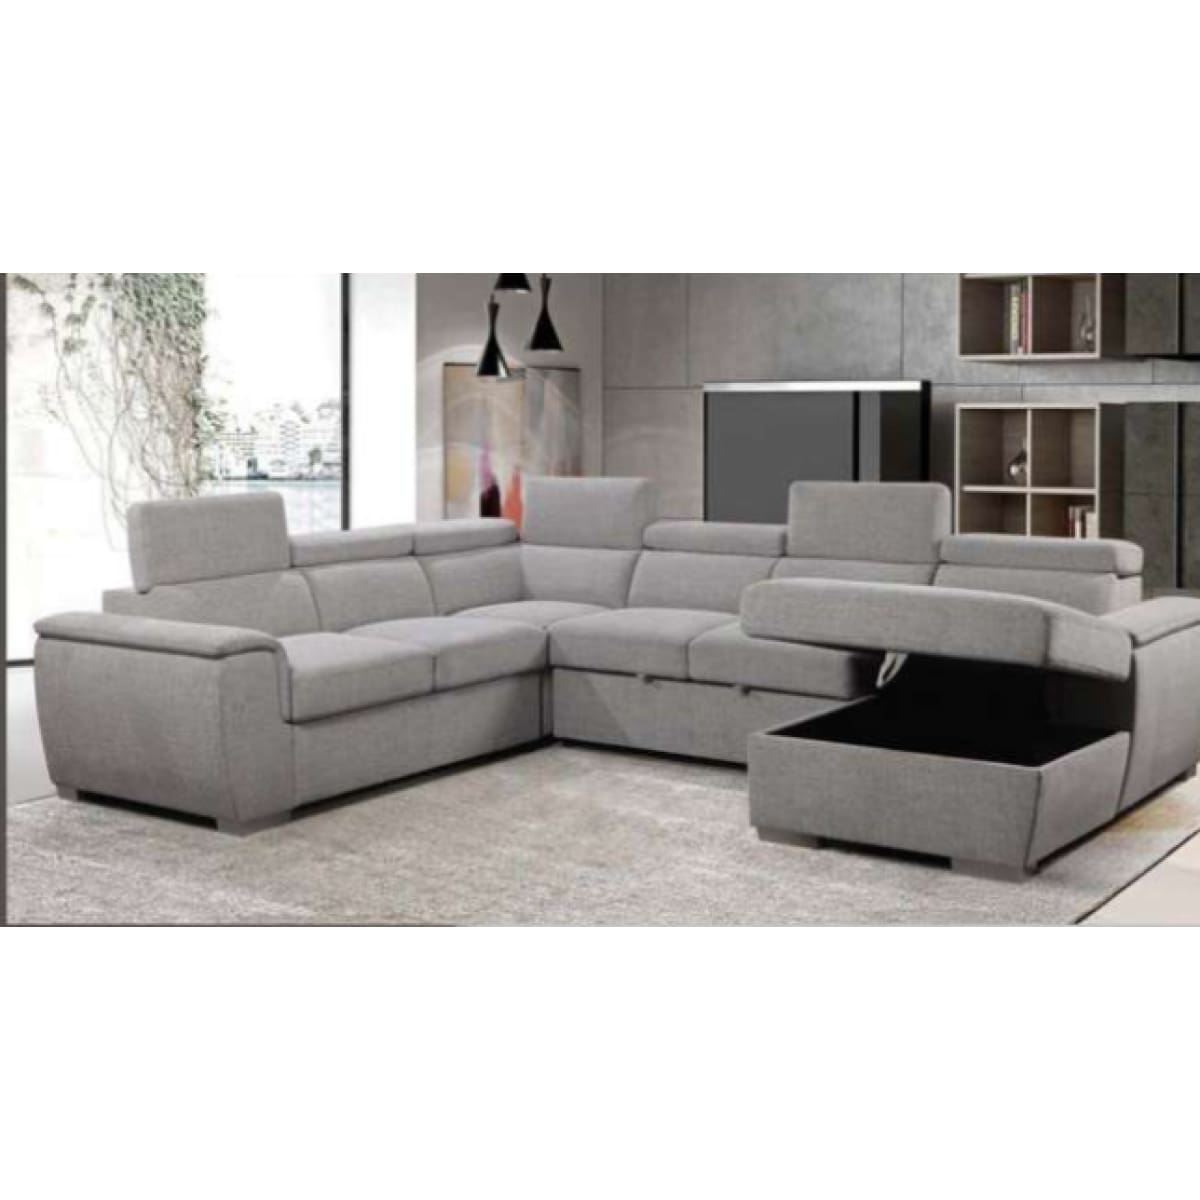 Colorado Sleeper Sectional - Sectional